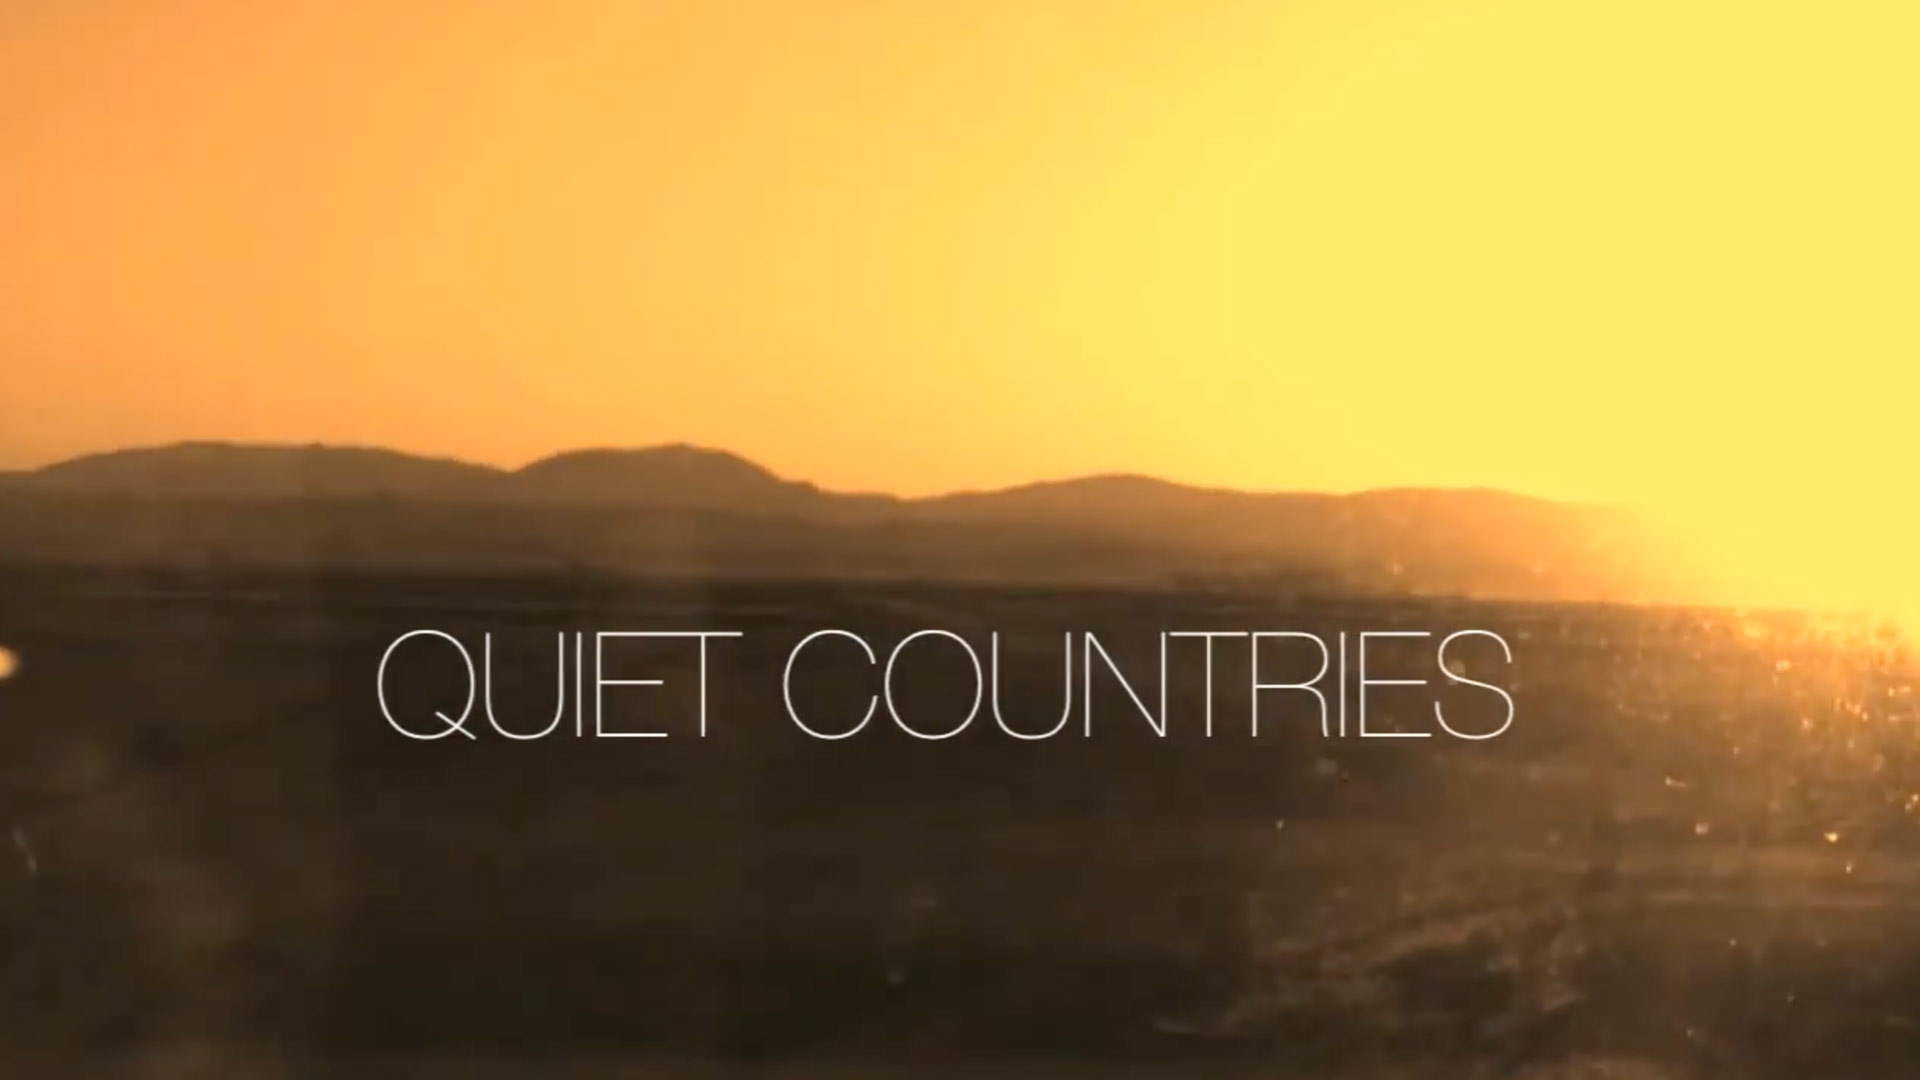 Quiet Countries Documentry for bands